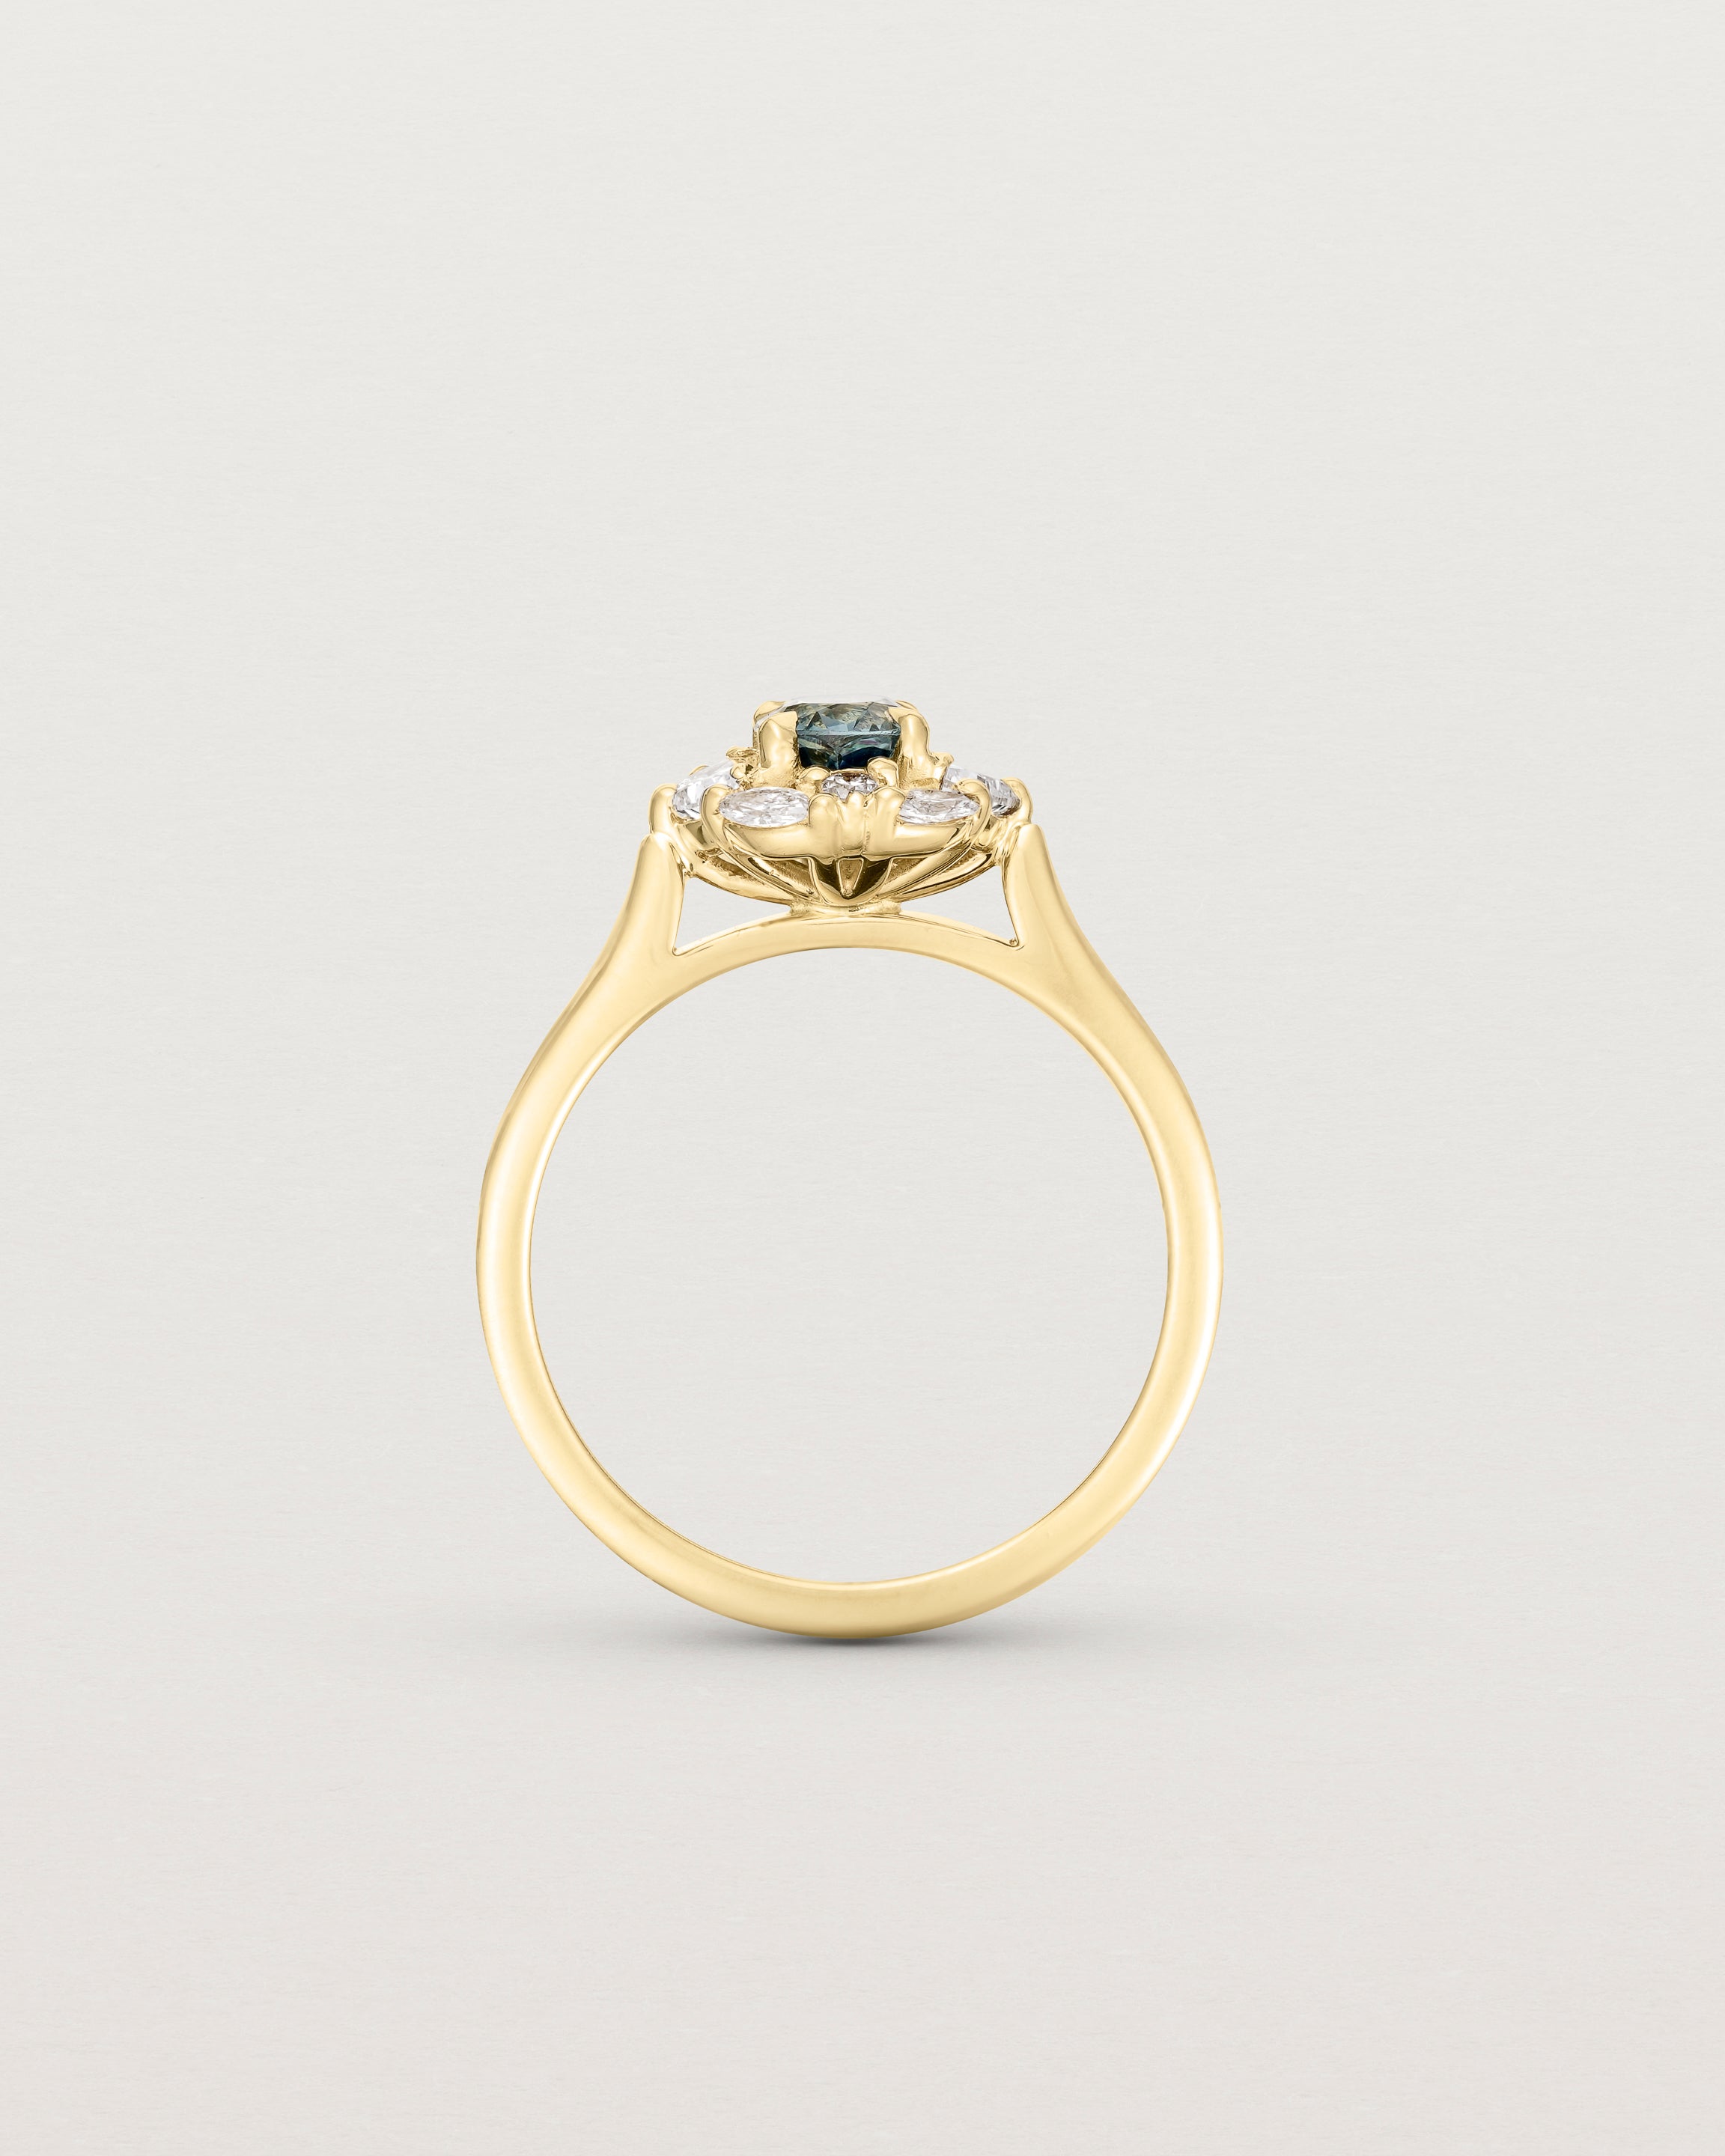 Standing view of the Mathilde Vintage Halo Ring | Sapphire & Diamonds.